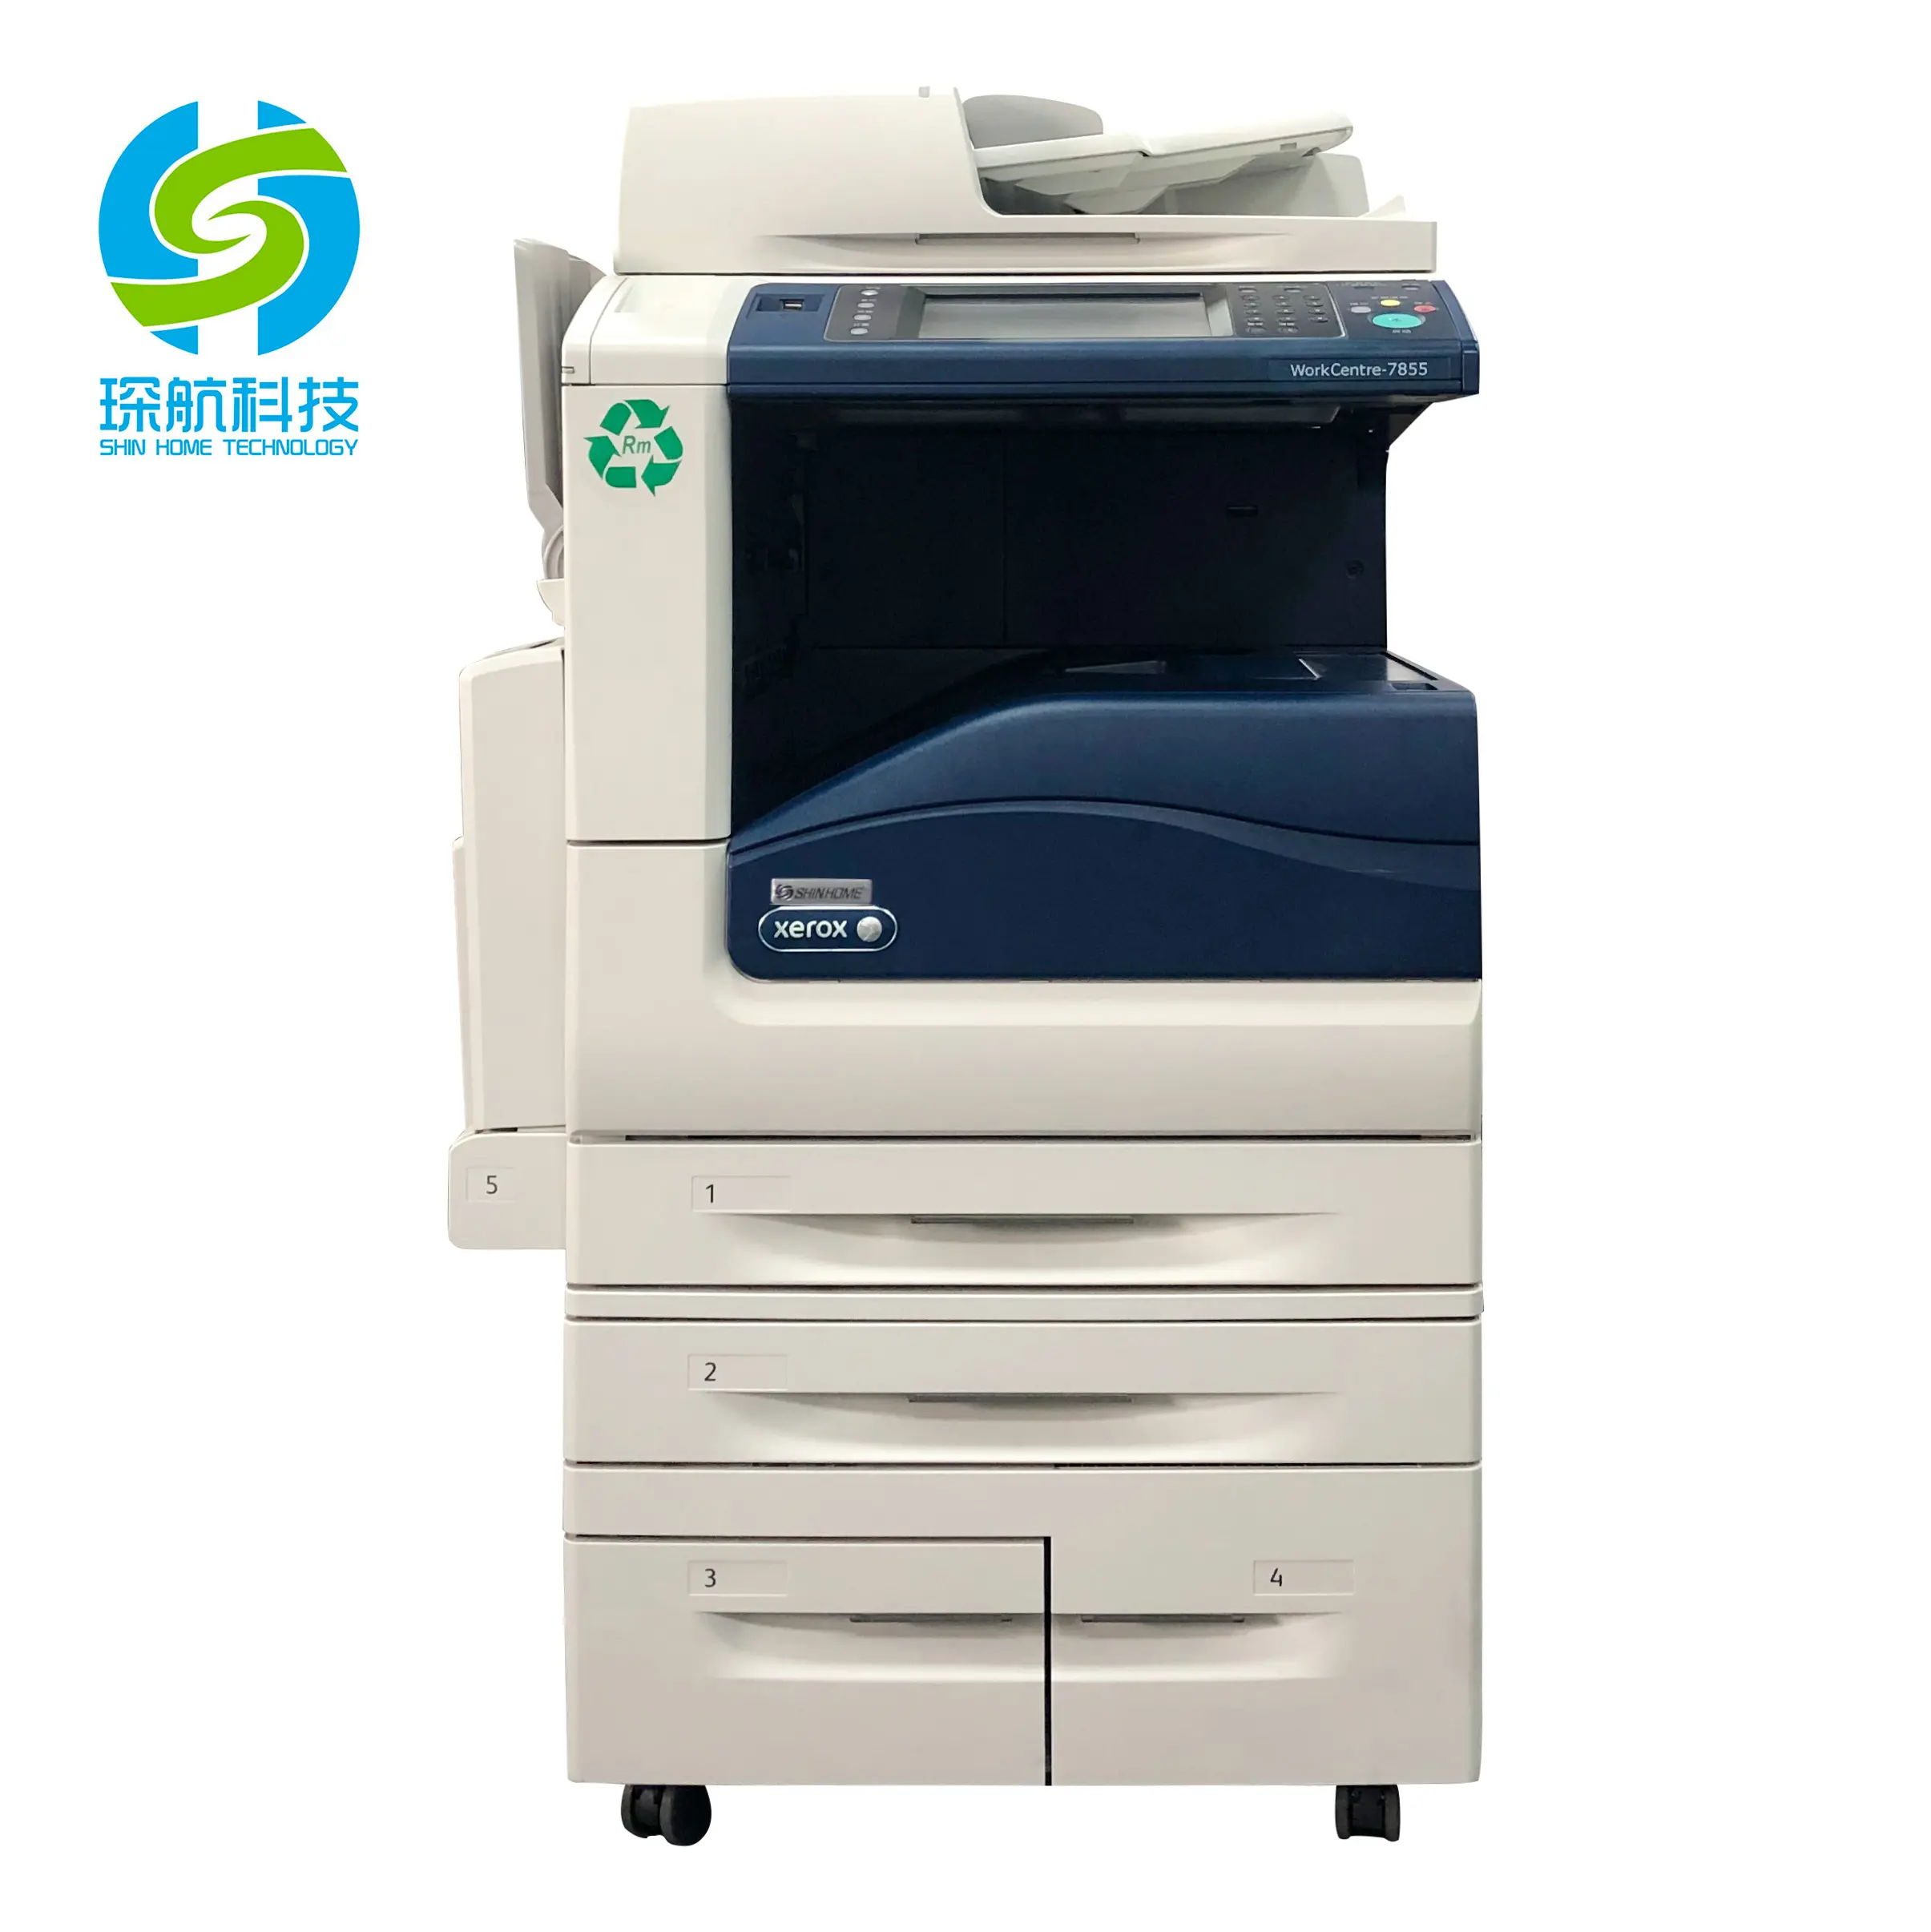 Multicolour Used Copiers For Xerox Workcentre 7855i Duplicator Printers High Efficiency Digital Photocopiers Printing Machine